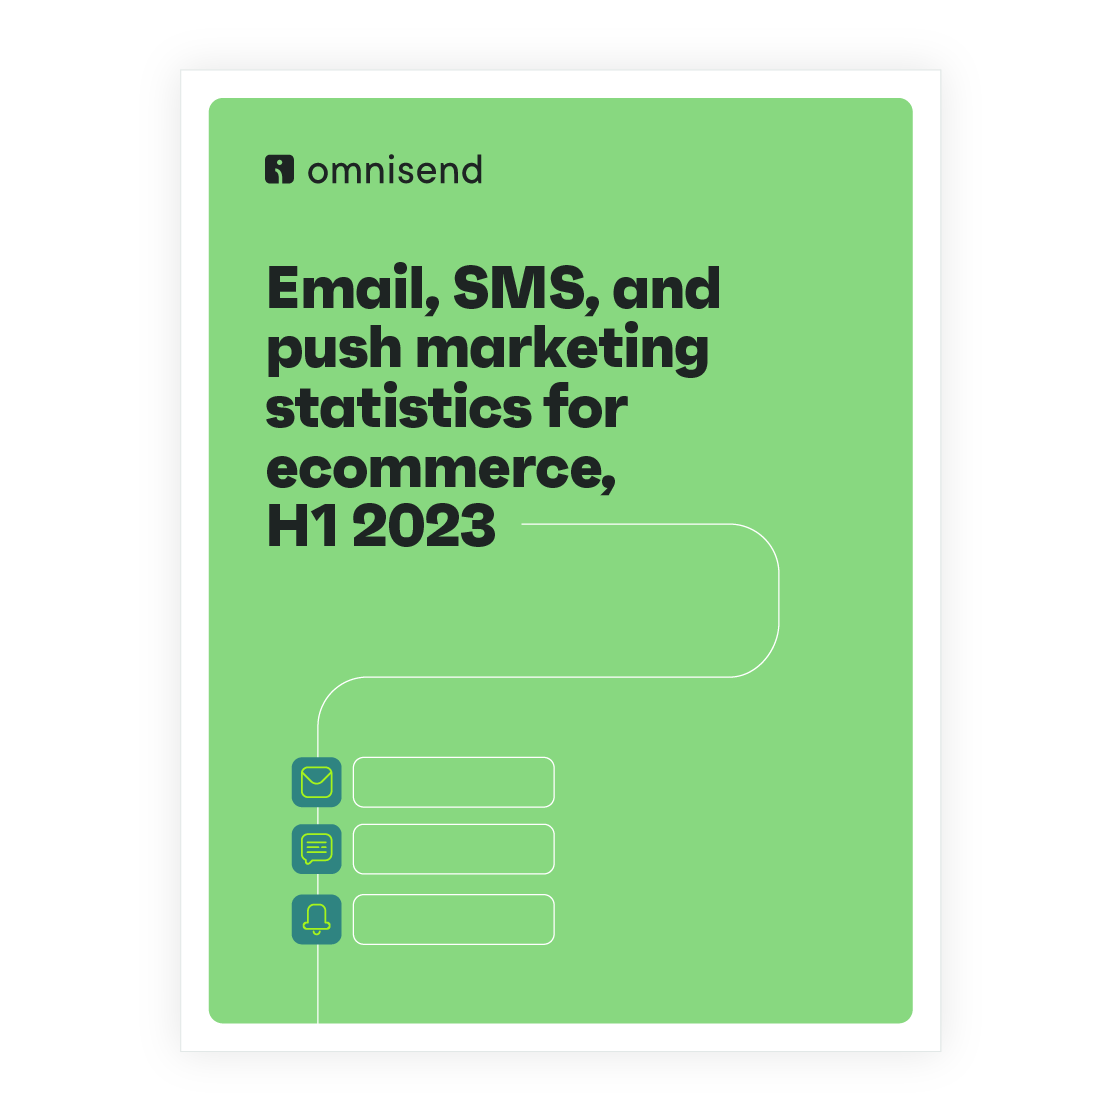 Email, SMS, and push marketing statistics for ecommerce in H1 2023